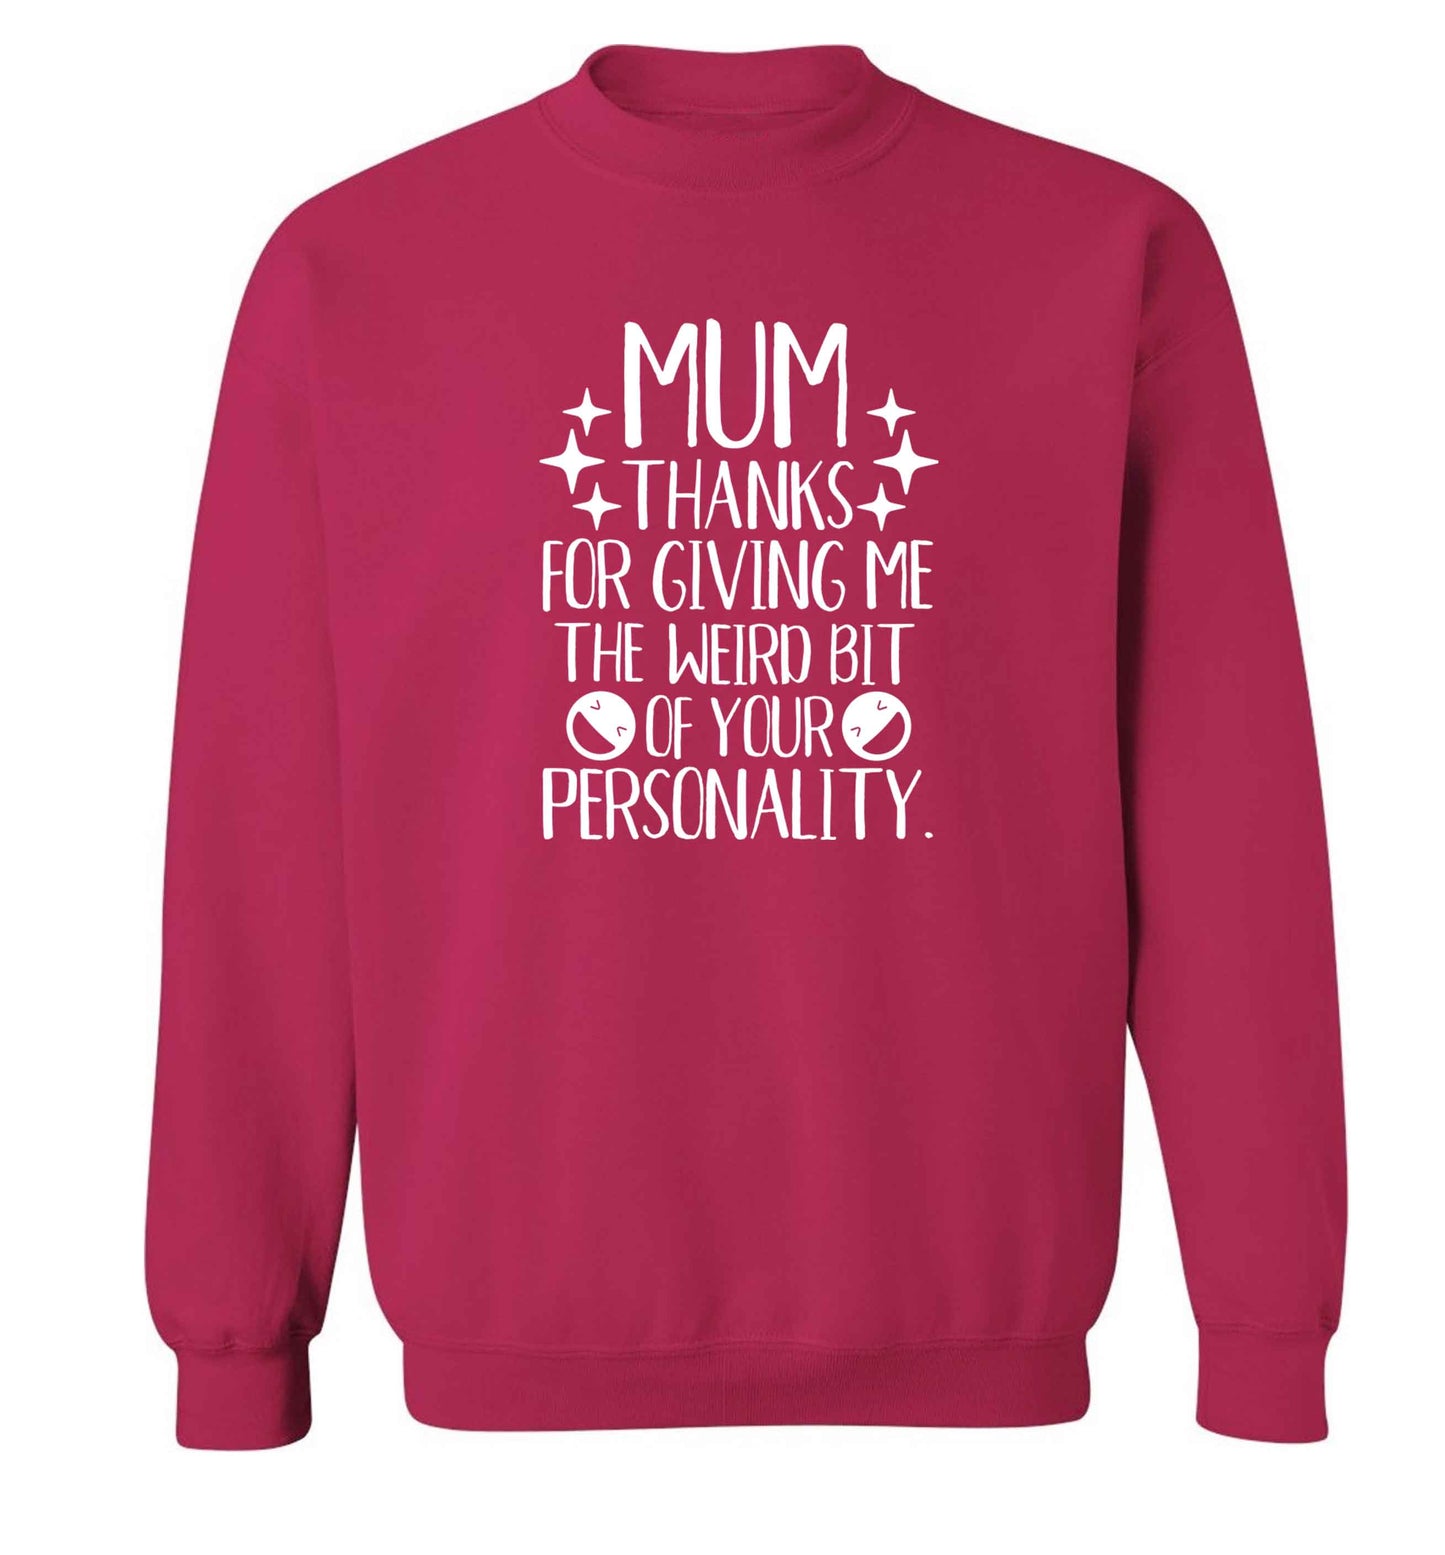 Mum thanks for giving me the weird bit of your personality adult's unisex pink sweater 2XL